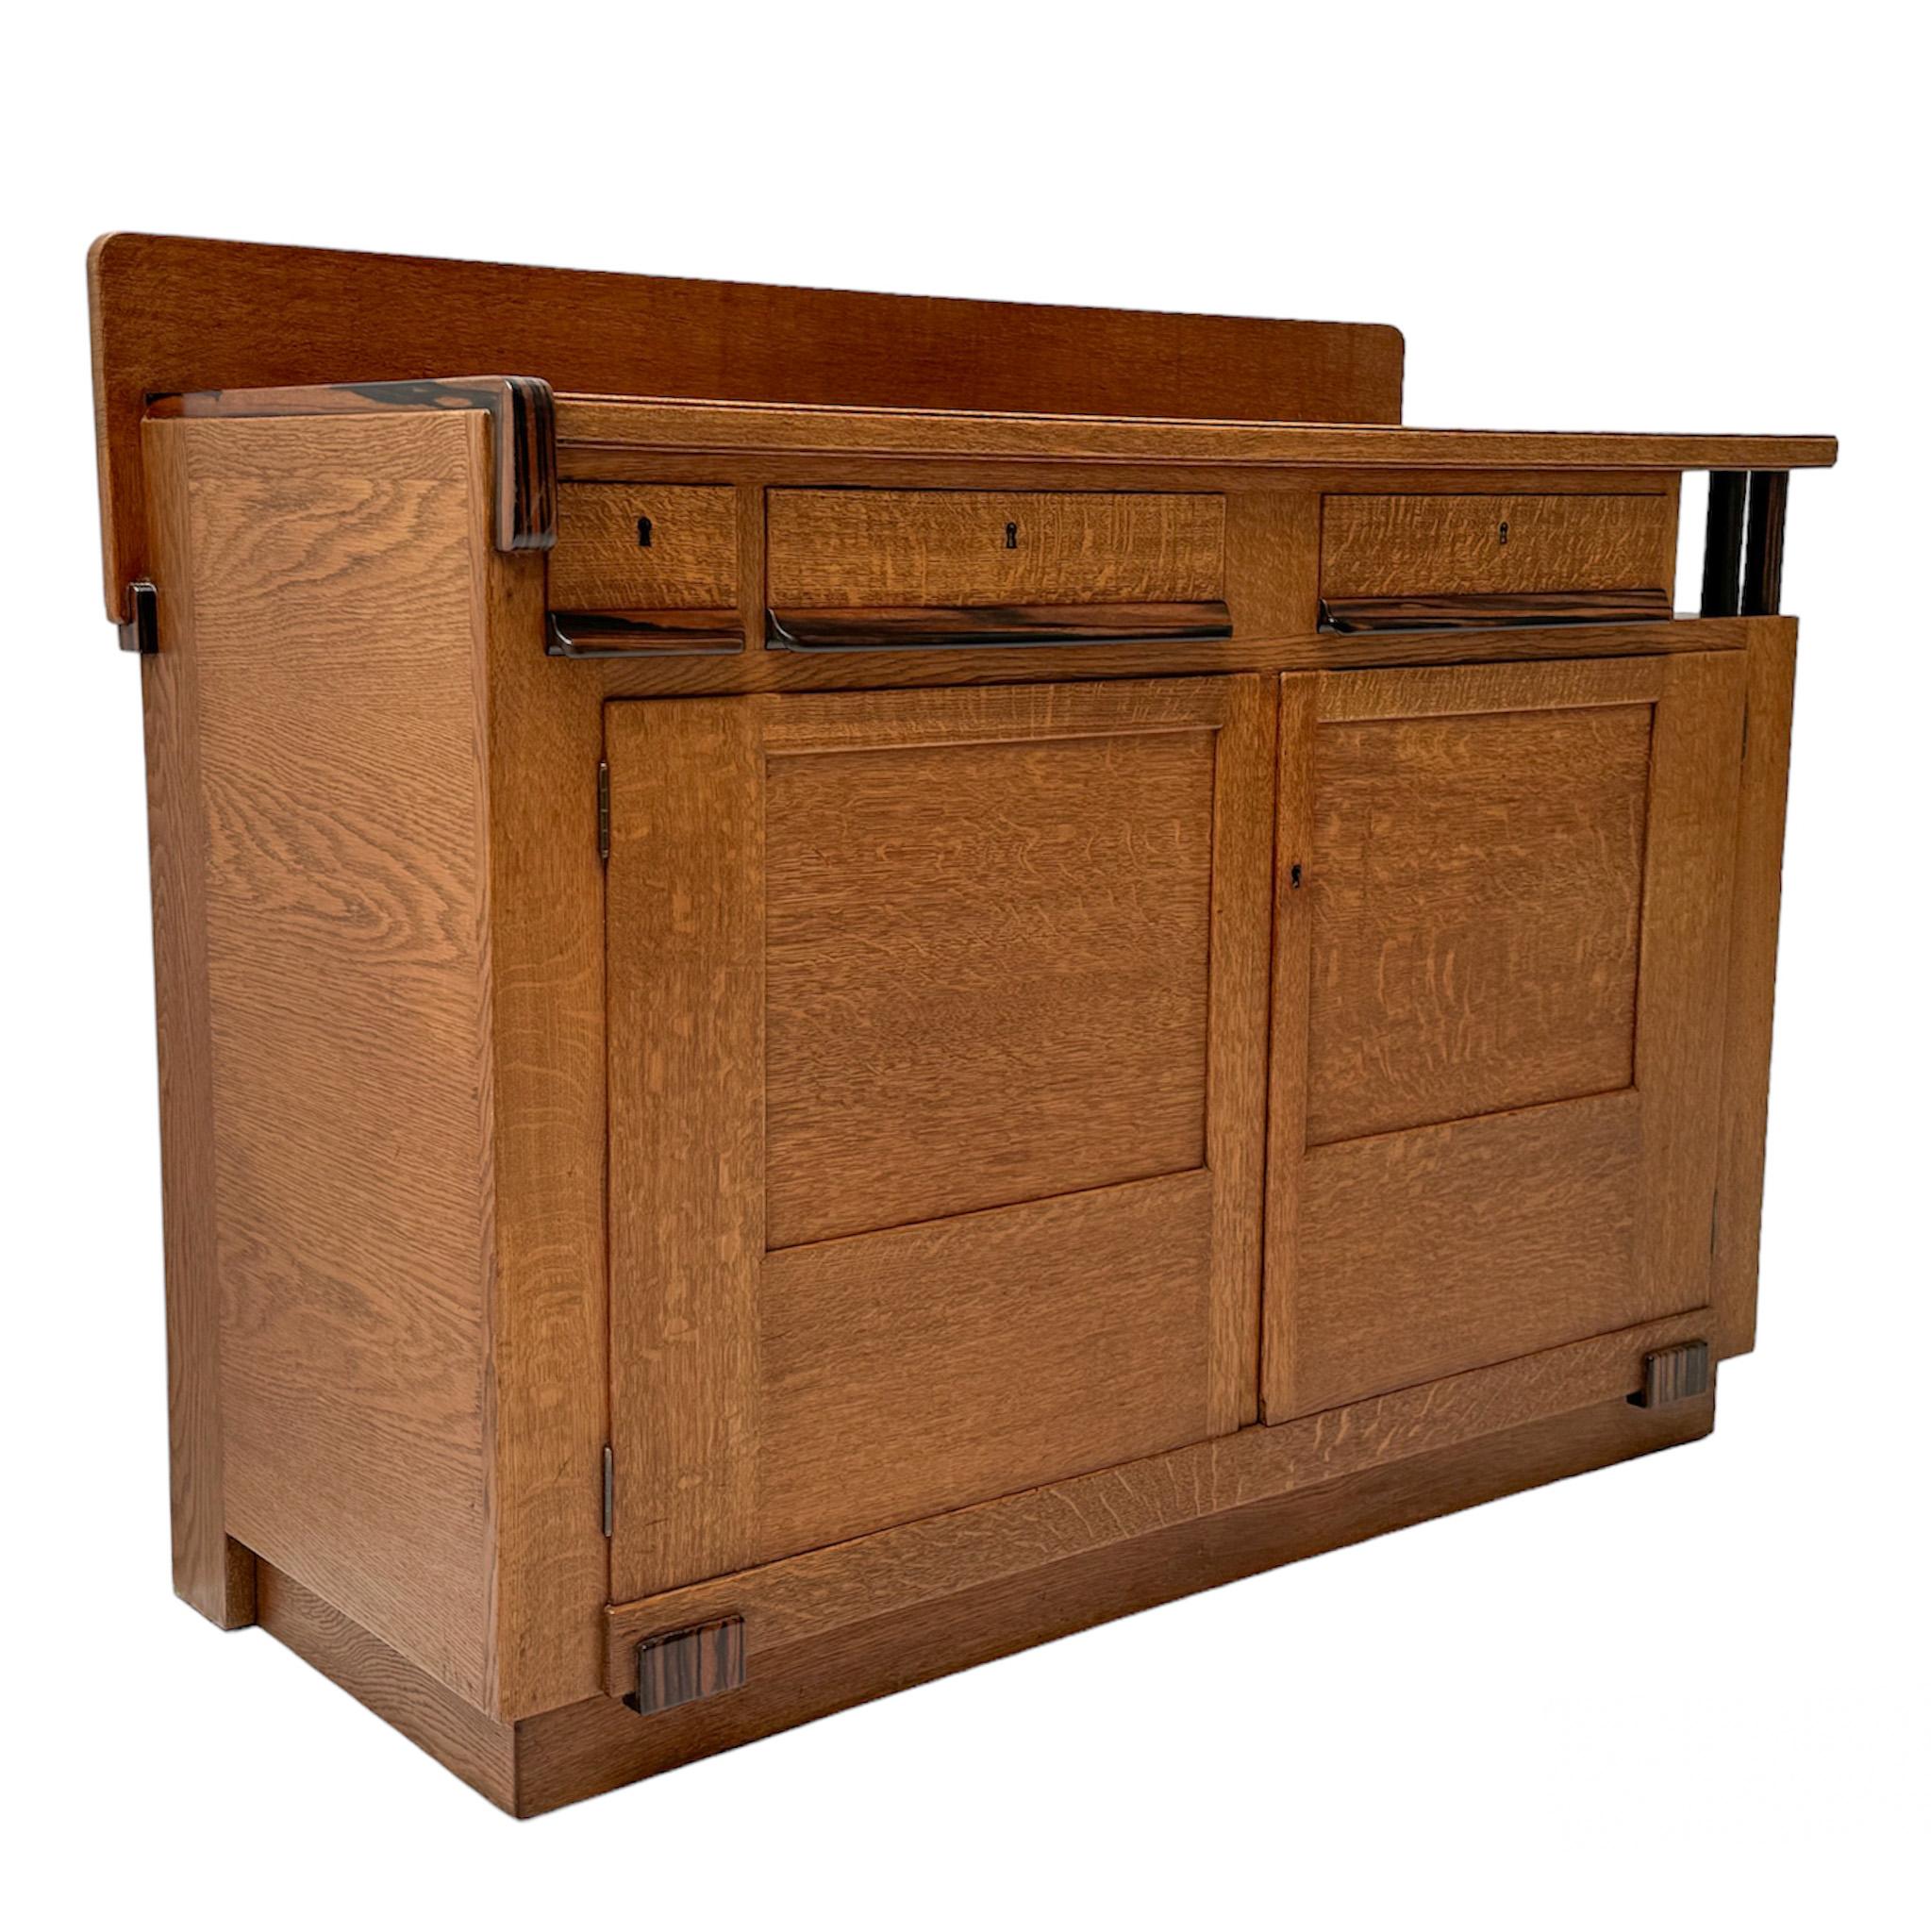 Oak Art Deco Modernist Credenza or Sideboard by Anton Lucas, 1920s In Good Condition For Sale In Amsterdam, NL